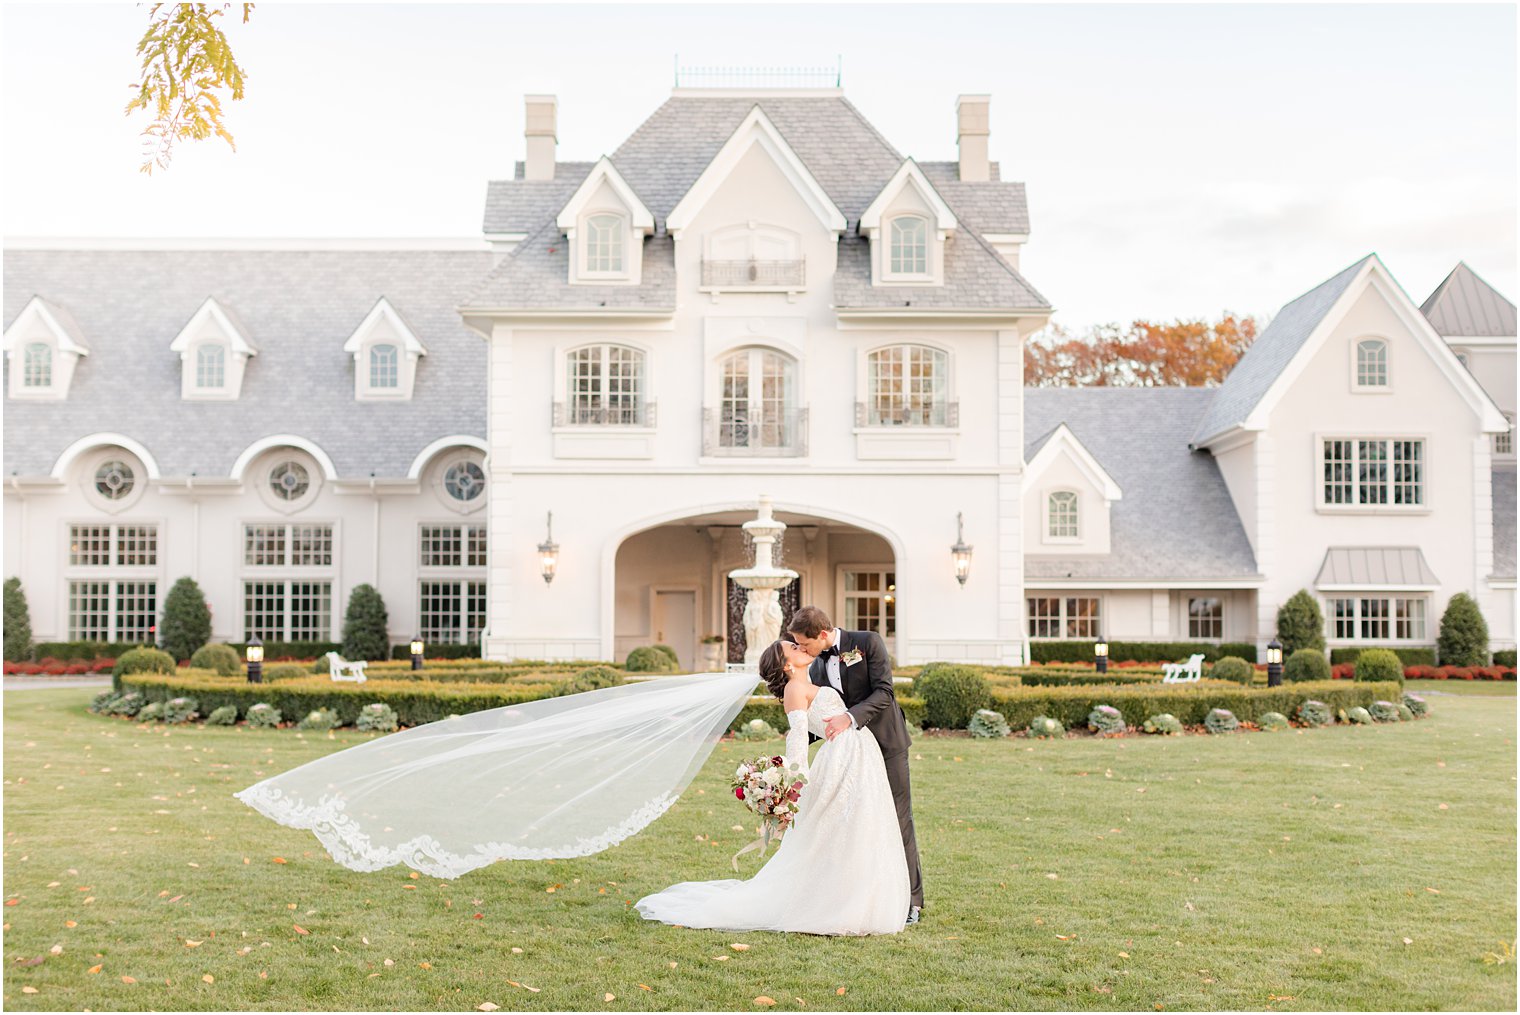 newlyweds kiss on front lawn by fountain at Park Chateau Estate with bride's veil floating behind them